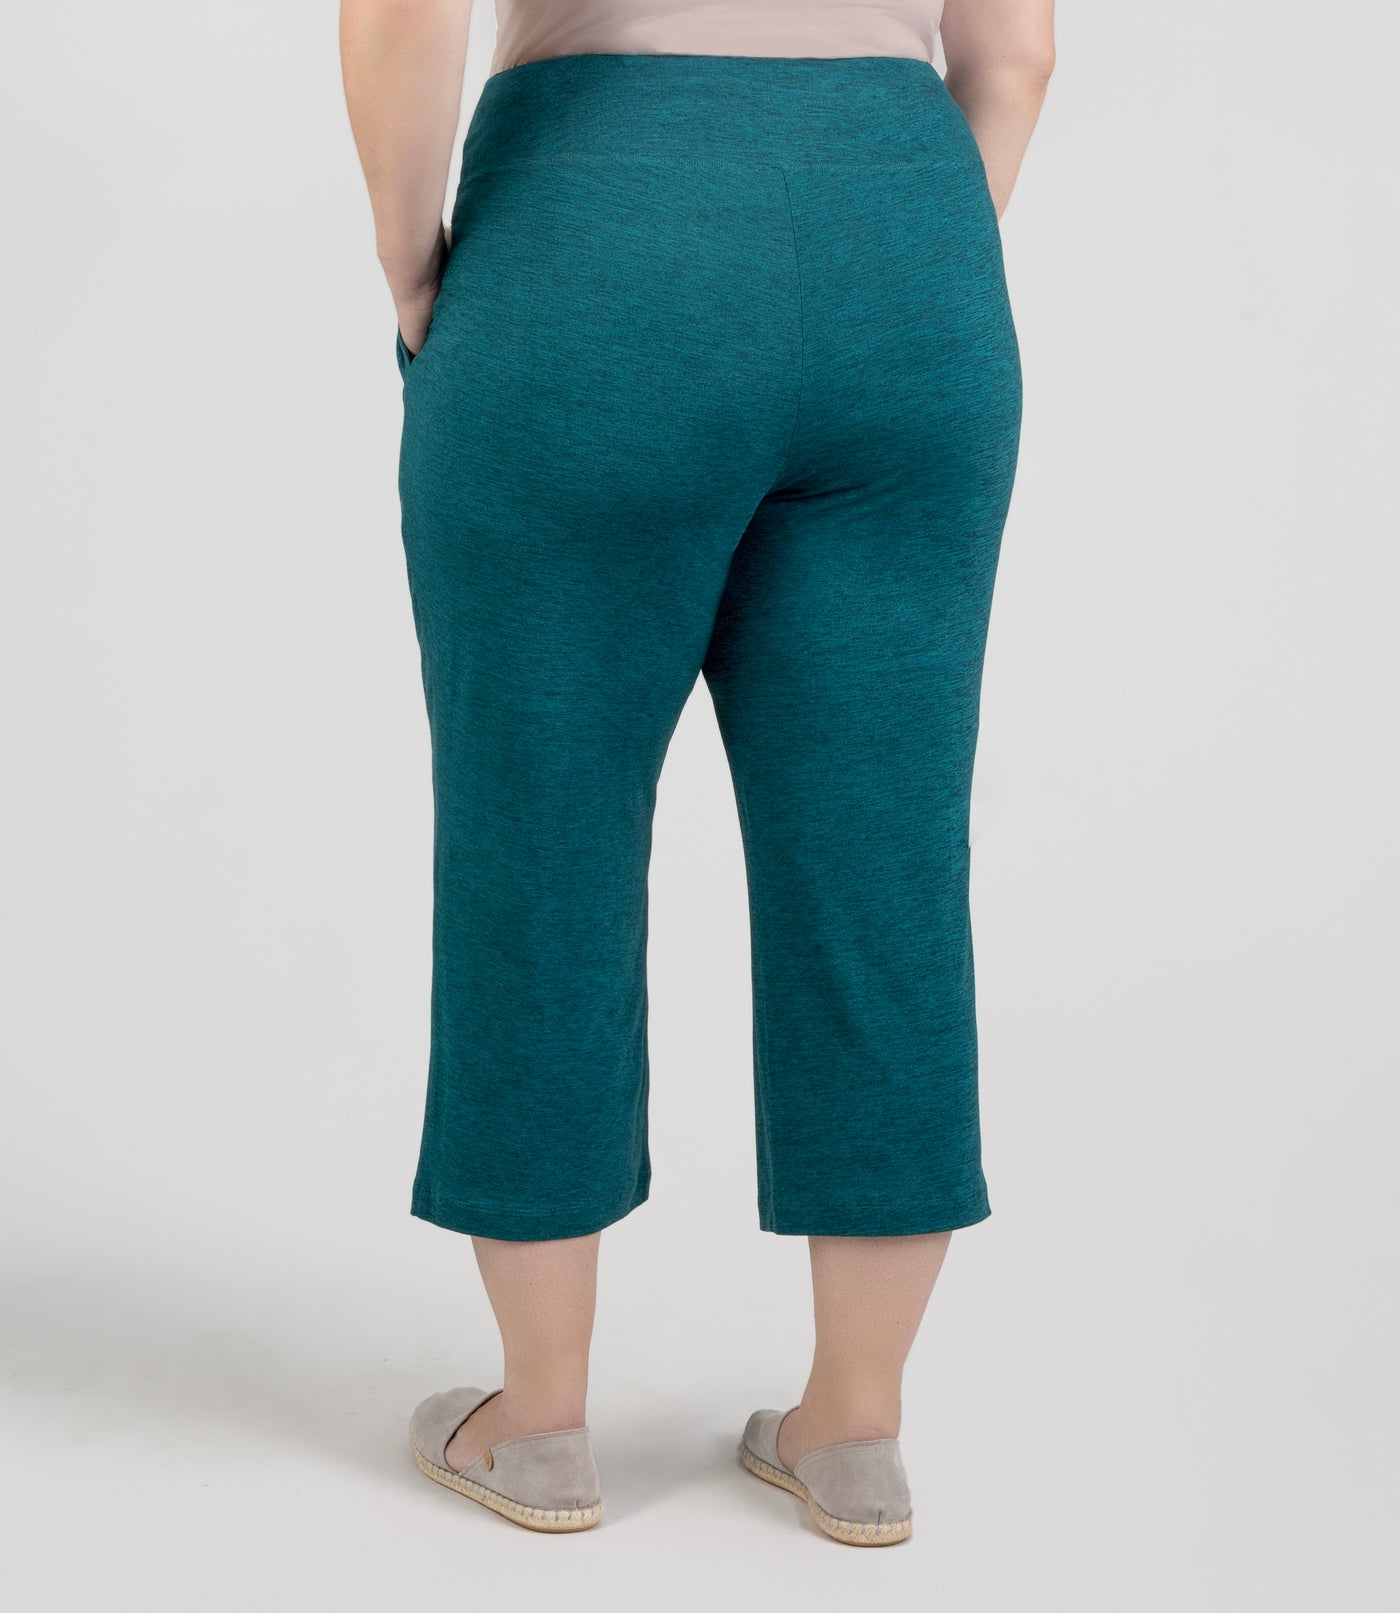 JunoActive model, facing back, wearing SoftSupreme Pocketed Lounge Capri in color heather dark teal. Left hand in pocket of capri and right arm hanging by side.